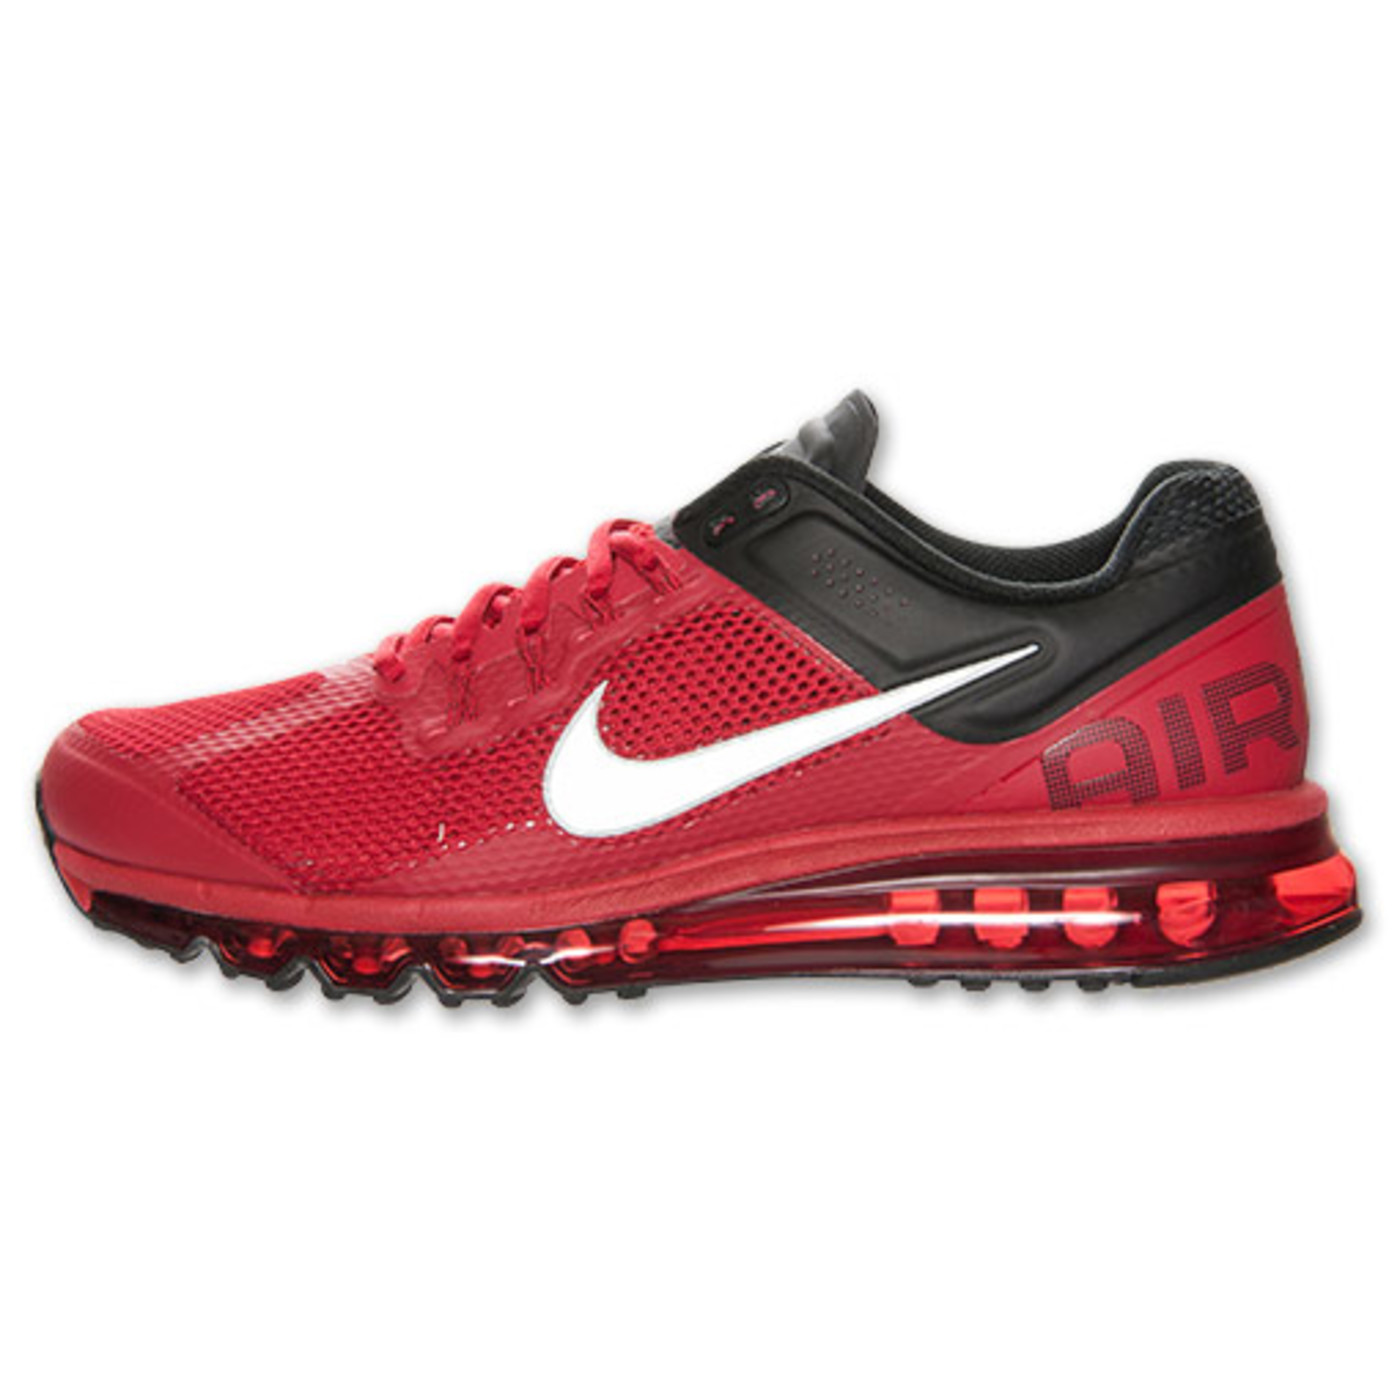 nike air max 2013 black and red